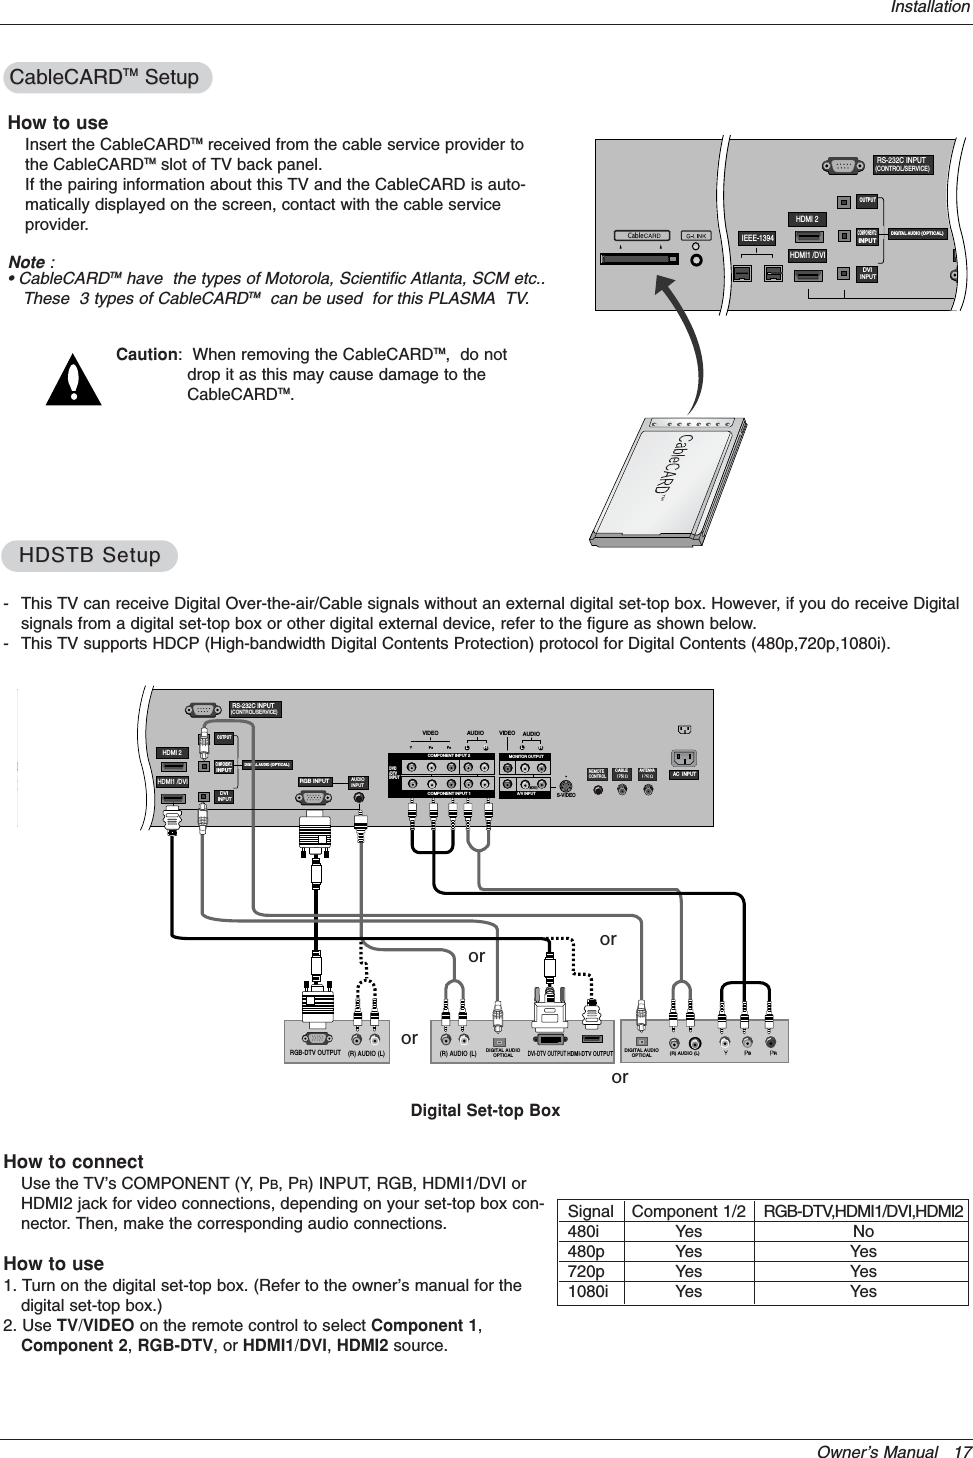 Owner’s Manual   17Installation- This TV can receive Digital Over-the-air/Cable signals without an external digital set-top box. However, if you do receive Digitalsignals from a digital set-top box or other digital external device, refer to the figure as shown below.- This TV supports HDCP (High-bandwidth Digital Contents Protection) protocol for Digital Contents (480p,720p,1080i).How to connectUse the TV’s COMPONENT (Y, PB, PR) INPUT, RGB, HDMI1/DVI orHDMI2 jack for video connections, depending on your set-top box con-nector. Then, make the corresponding audio connections.How to use1. Turn on the digital set-top box. (Refer to the owner’s manual for thedigital set-top box.) 2. Use TV/VIDEO on the remote control to select Component 1,Component 2,RGB-DTV, or HDMI1/DVI,HDMI2 source.HDSTB SetupHDSTB SetupRS-232C INPUT(CONTROL/SERVICE)AUDIORLDIGITAL AUDIO (OPTICAL)DVIINPUTCOMPONENT2INPUTOUTPUTRGB INPUTVIDEOHDMI 2HDMI1 /DVICOMPONENT INPUT 1RL(MONO)CABLEANTENNA AC  INPUTDVD/DTVINPUTIEEE-1394COMPONENT INPUT 2MONITOR OUTPUTA/V INPUT VIDEOAUDIOCable(R) AUDIO (L)RGB-DTV OUTPUTBR(R) AUDIO (L)DIGITAL AUDIOOPTICAL(R) AUDIO (L)DVI-DTV OUTPUTDIGITAL AUDIOOPTICALHDMI-DTV OUTPUTAUDIOINPUTS-VIDEOREMOTECONTROLDigital Set-top BoxorororSignal480i480p720p1080iComponent 1/2YesYesYesYesRGB-DTV,HDMI1/DVI,HDMI2NoYesYesYesCableCARDCableCARDTMTM SetupSetupRS-232C INPUT(CONTROL/SERVICE)DIGITAL AUDIO (OPTICAL)DVIINPUTCOMPONENT2INPUTOUTPUTRGB INHDMI 2HDMI1 /DVIIEEE-1394CableHow to useInsert the CableCARDTMTM received from the cable service provider tothe CableCARDTMTM slot of TV back panel. If the pairing information about this TV and the CableCARD is auto-matically displayed on the screen, contact with the cable serviceprovider.Note :• CableCARDTMTM have  the types of Motorola, Scientific Atlanta, SCM etc..These  3 types of CableCARDTMTM can be used  for this PLASMA TV.Caution:  When removing the CableCARDTMTM,  do notdrop it as this may cause damage to theCableCARDTMTM.or